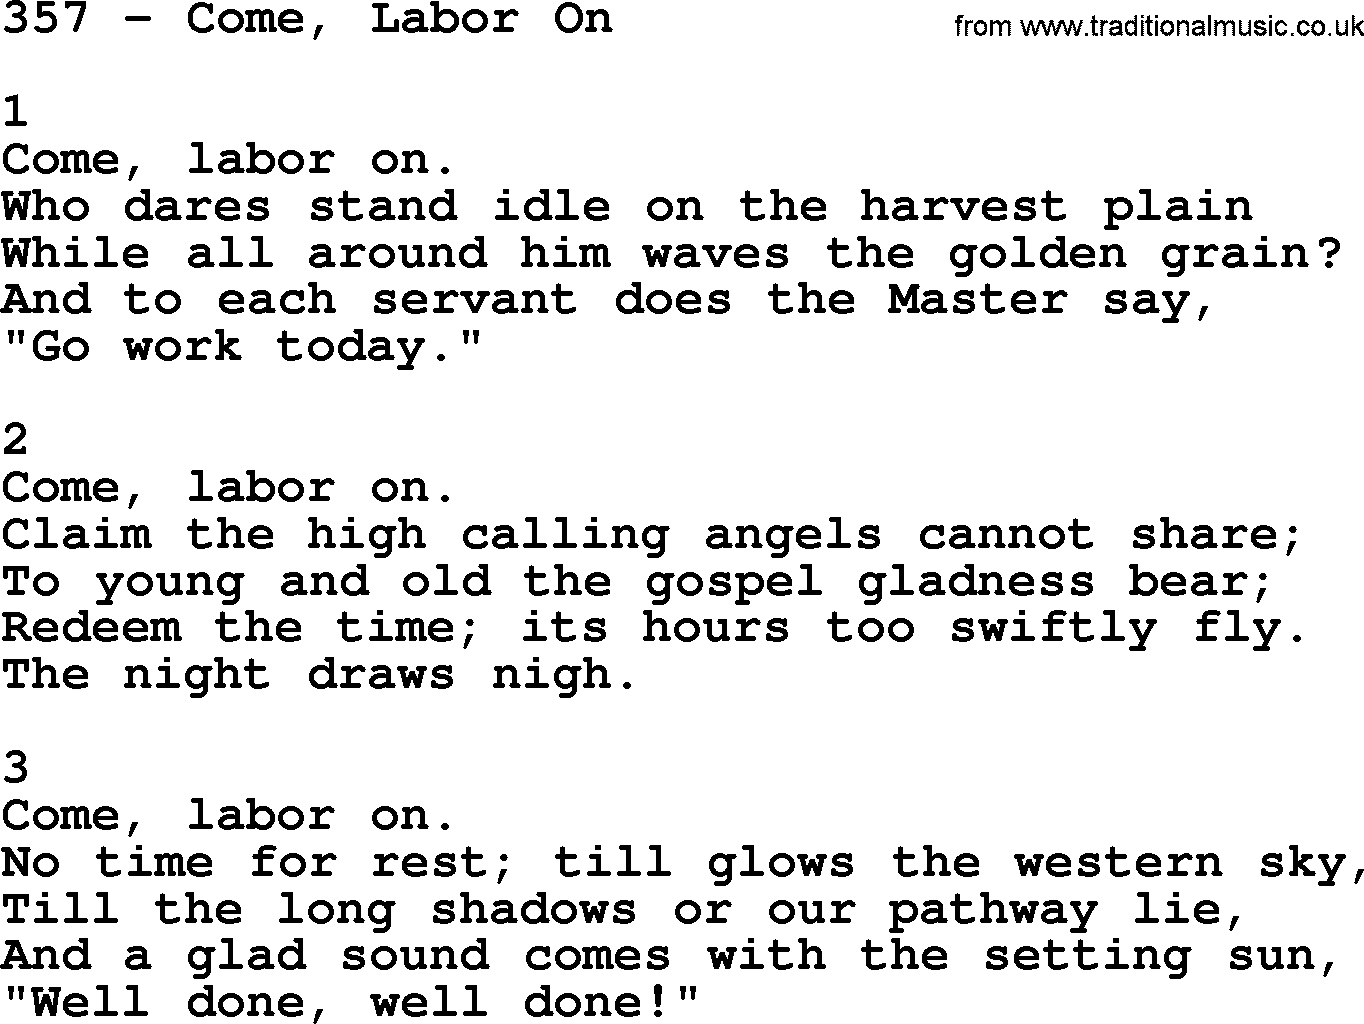 Complete Adventis Hymnal, title: 357-Come, Labor On, with lyrics, midi, mp3, powerpoints(PPT) and PDF,